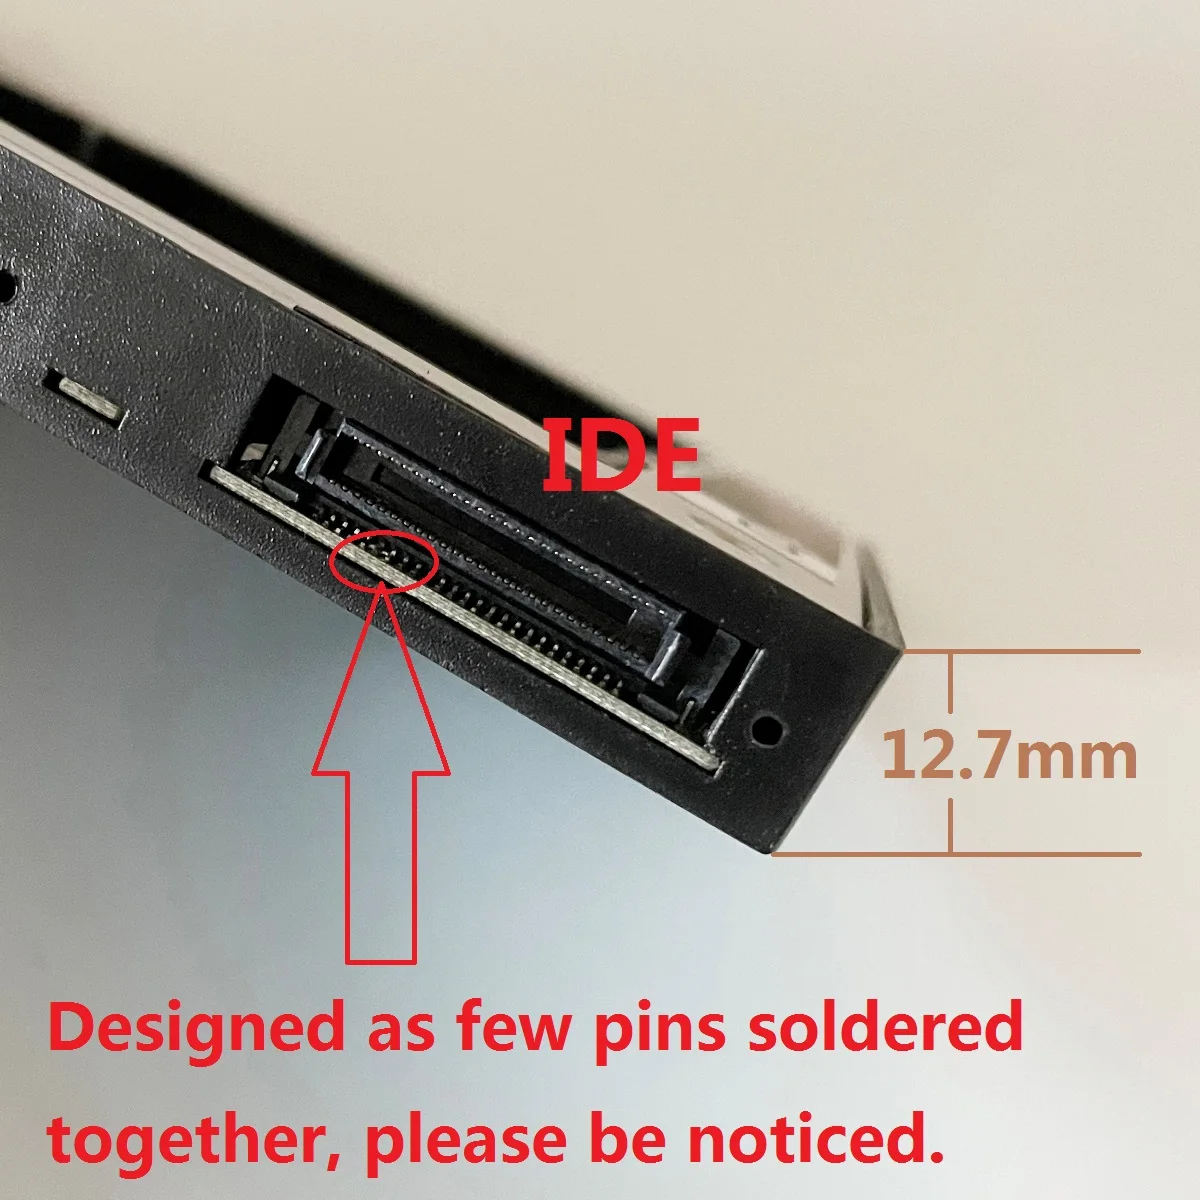 

2nd Second HDD SSD Hard Drive Optical Caddy Frame Bracket Adapter for iBook G4 12" A1054 A1133 Series replace CW-8124-C DVD ODD